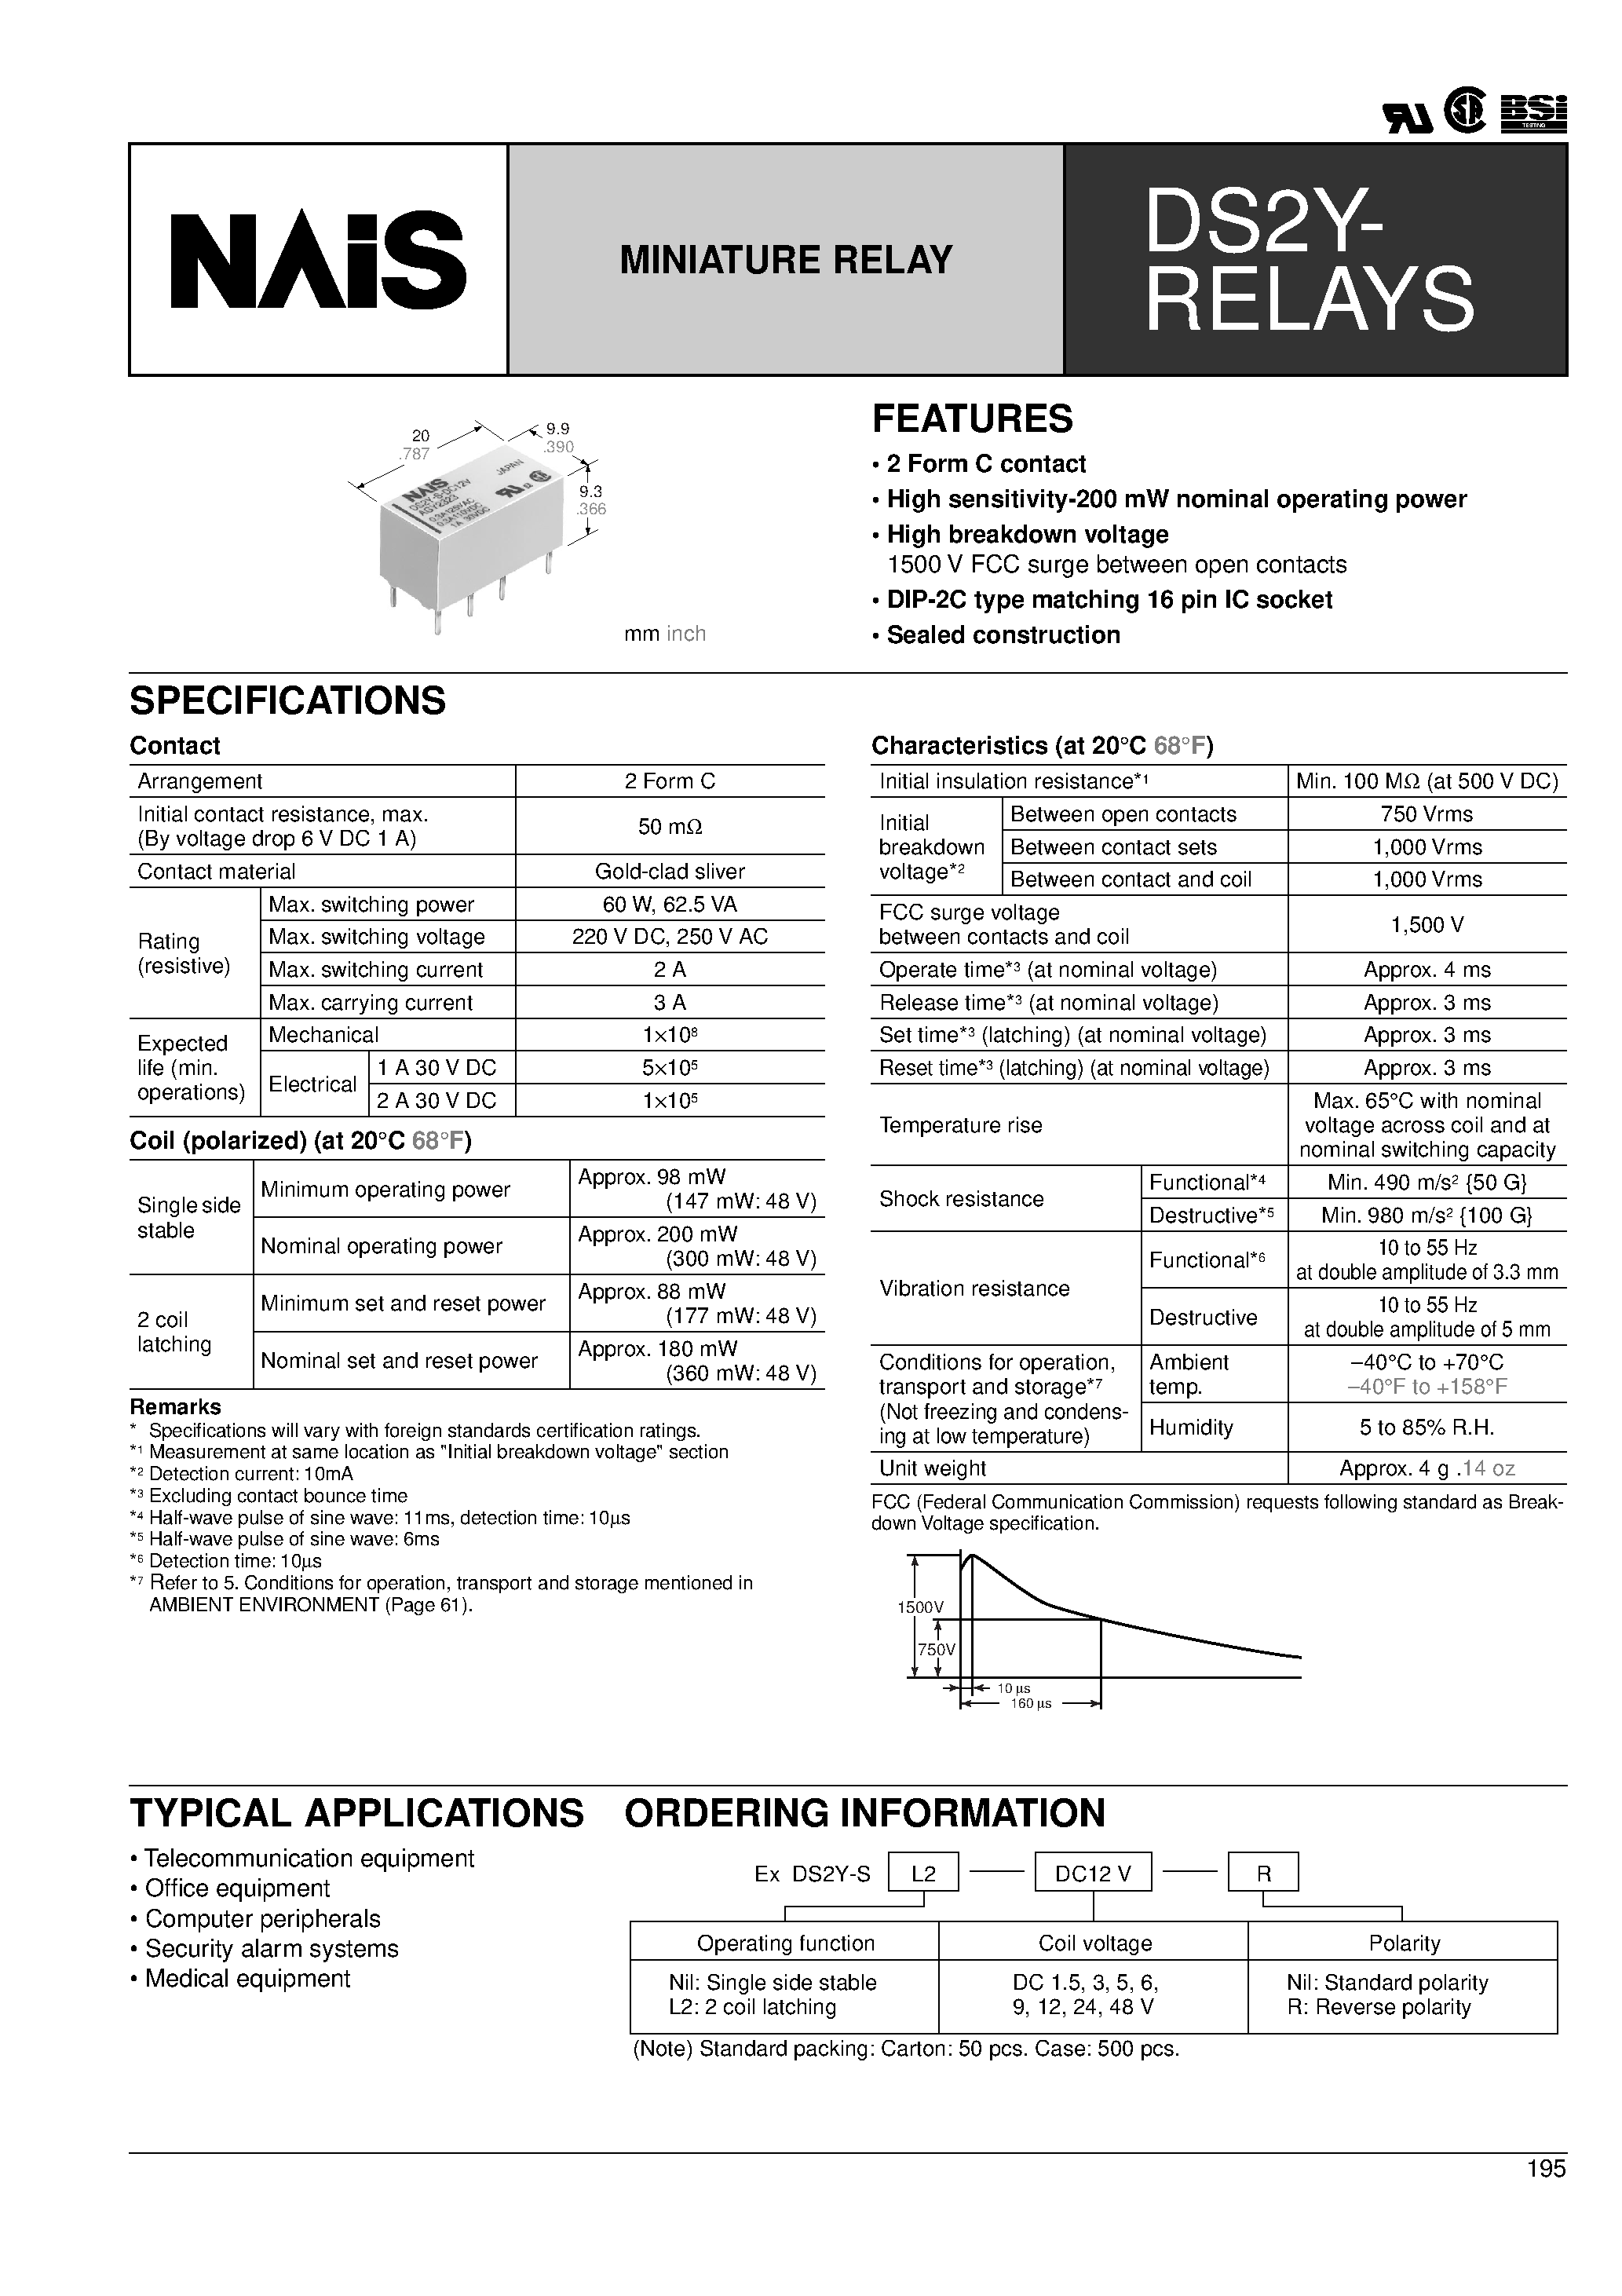 Datasheet DS2Y-S-DC6V - 2 Form C contact High sensitivity-200 mW nominal operating power page 1